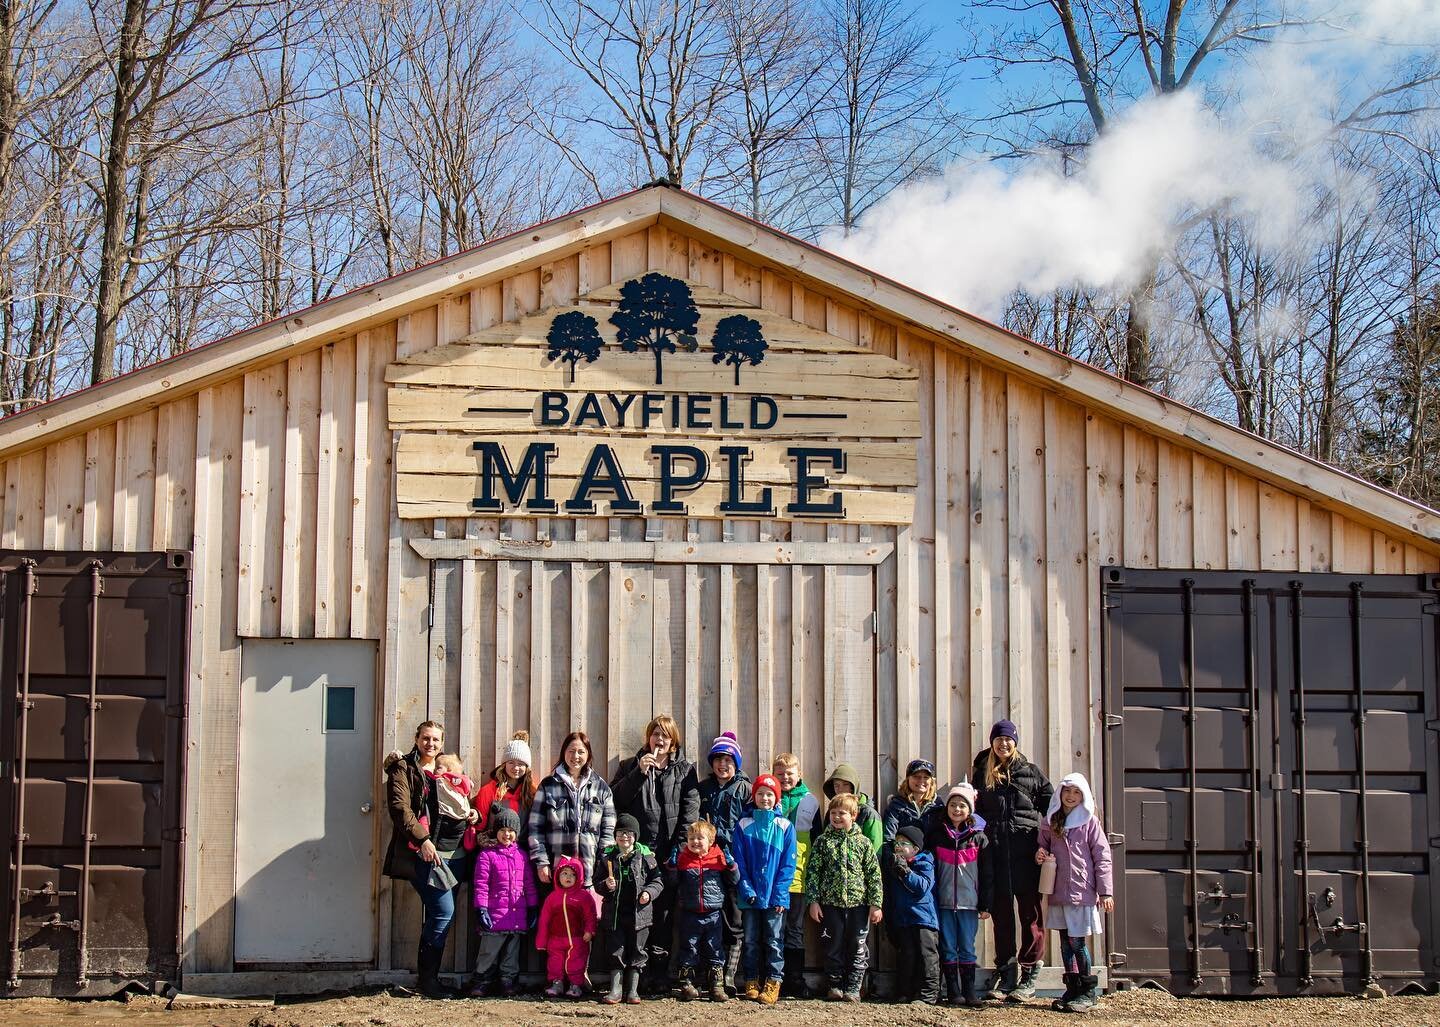 Yesterday was the perfect day for a little sugar shack tour and some taffy on snow ! Thanks to @hayleeecaldwell for the last two photos of the tour because we had no time to take any . So many great questions from all the kids as we followed the step